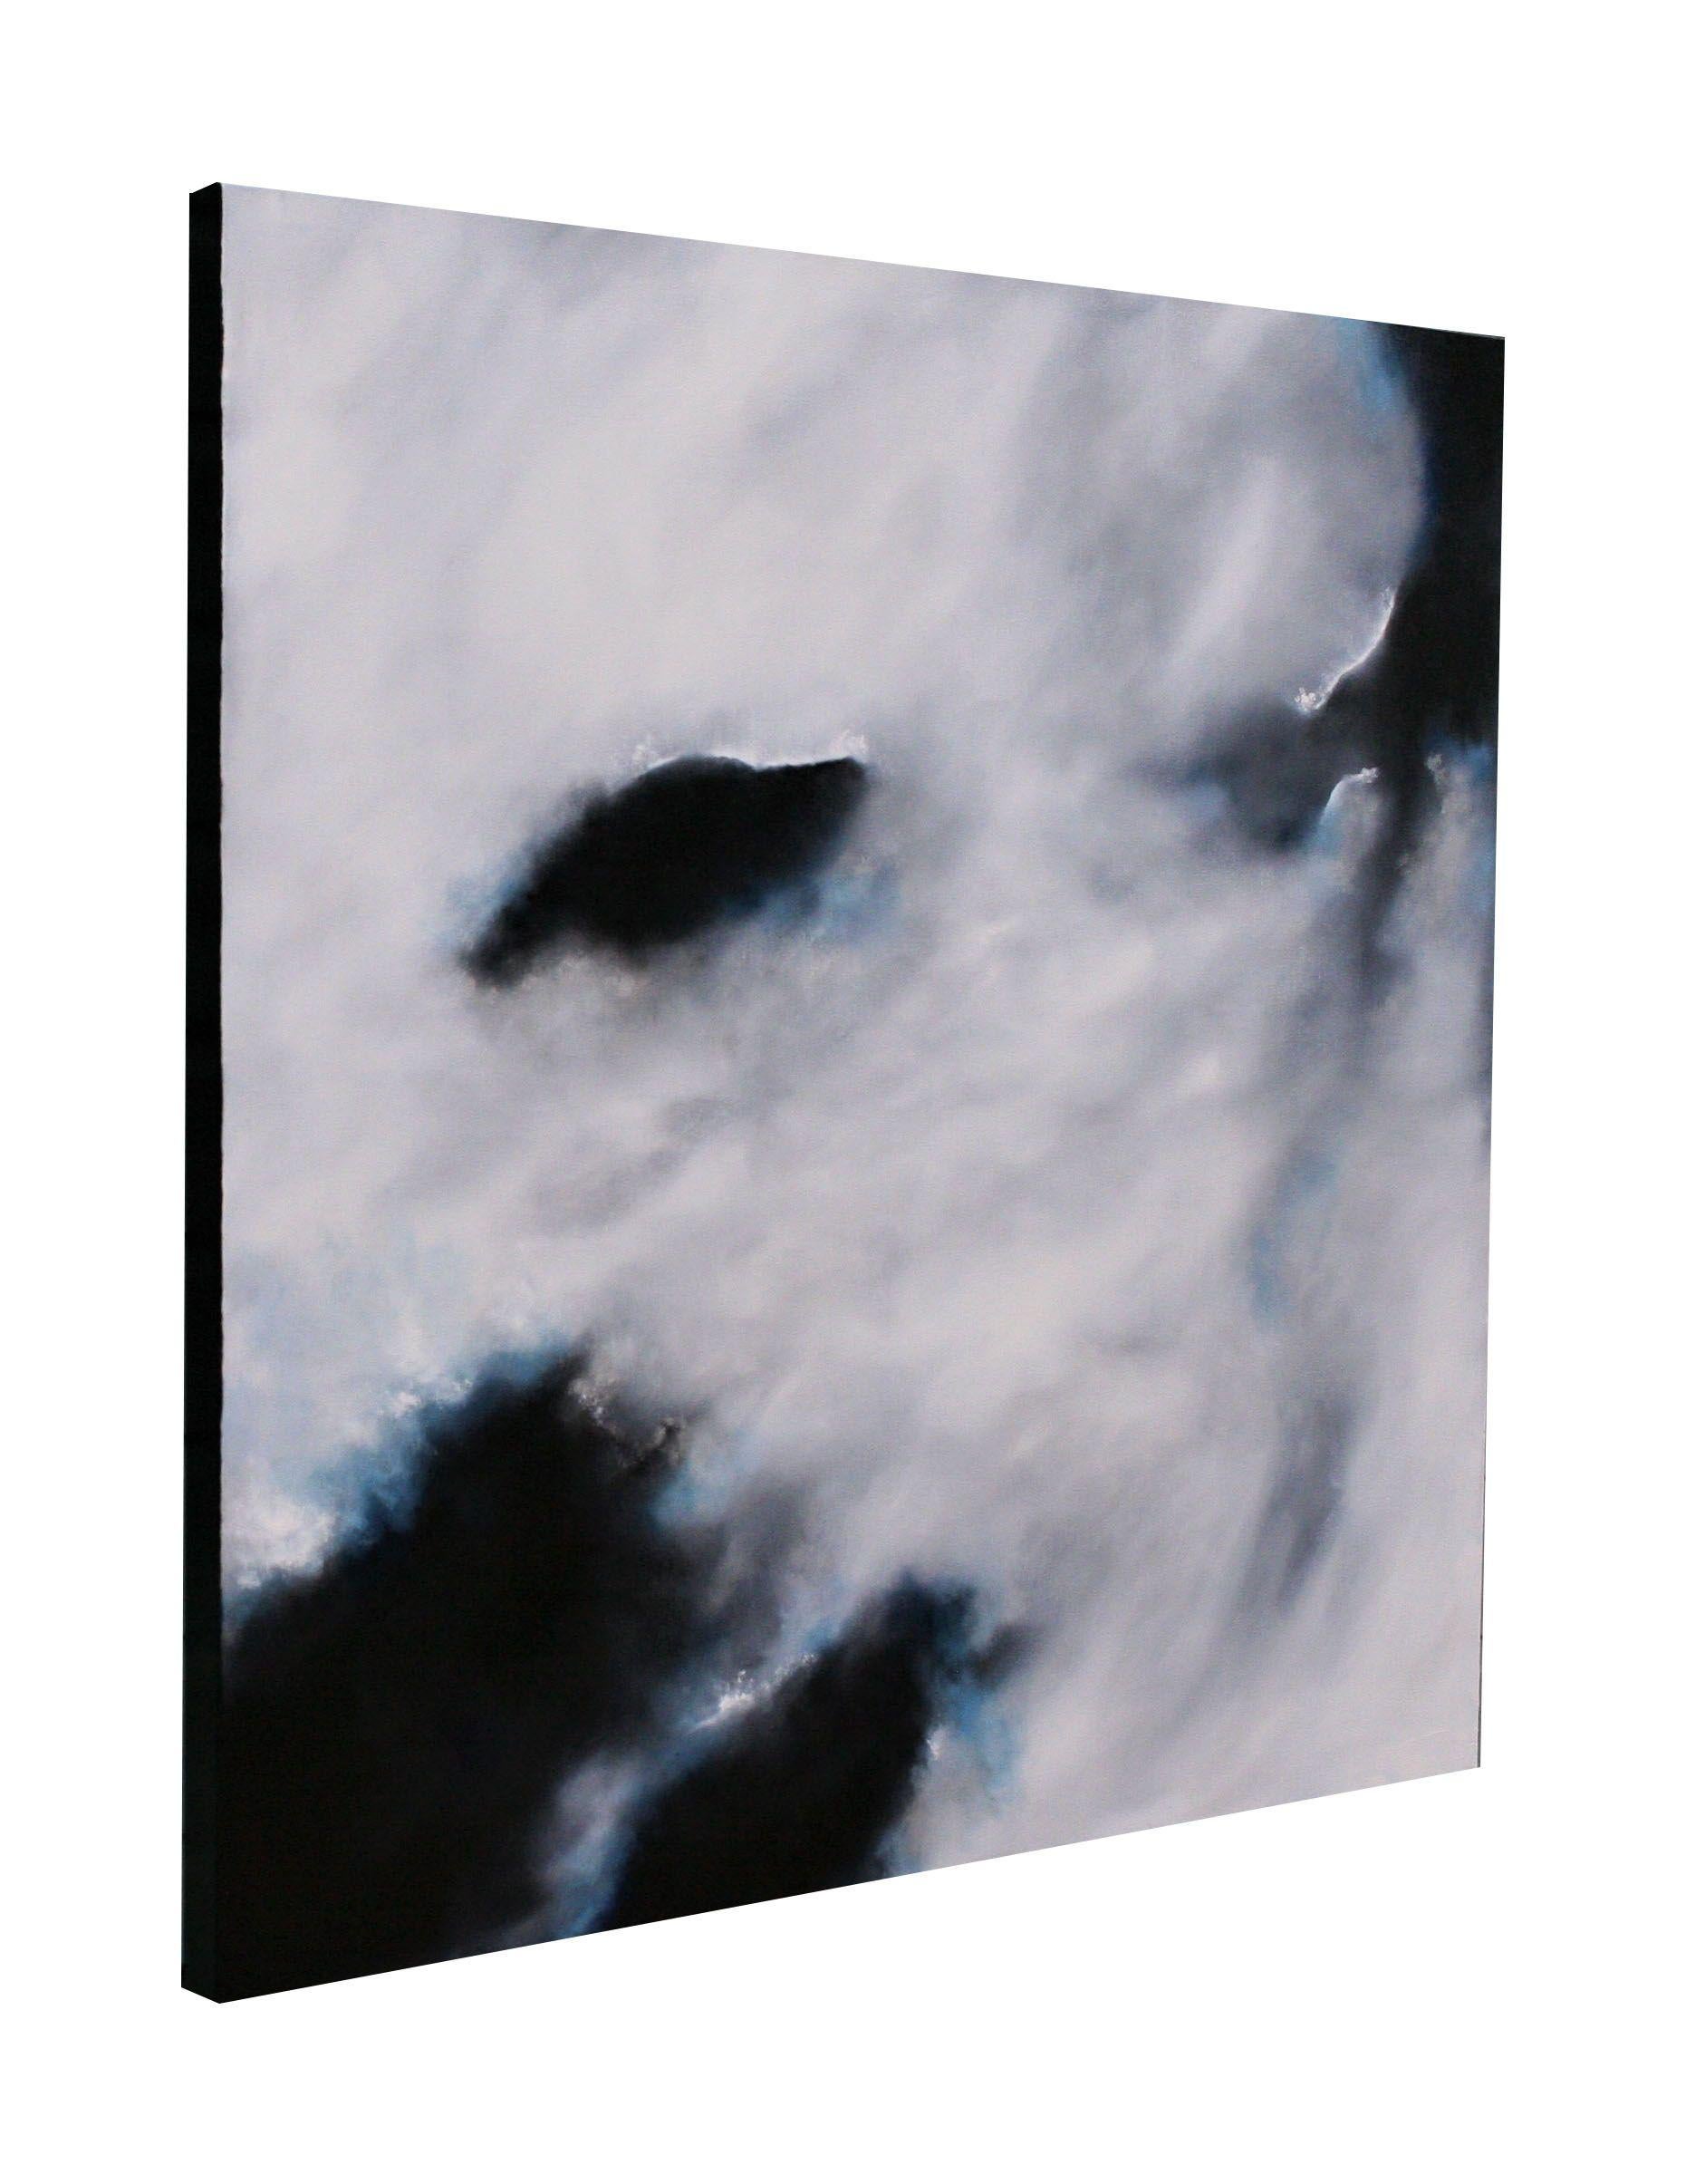 Every Cloud Has A Silver Lining Diptych, Painting, Oil on Canvas 1